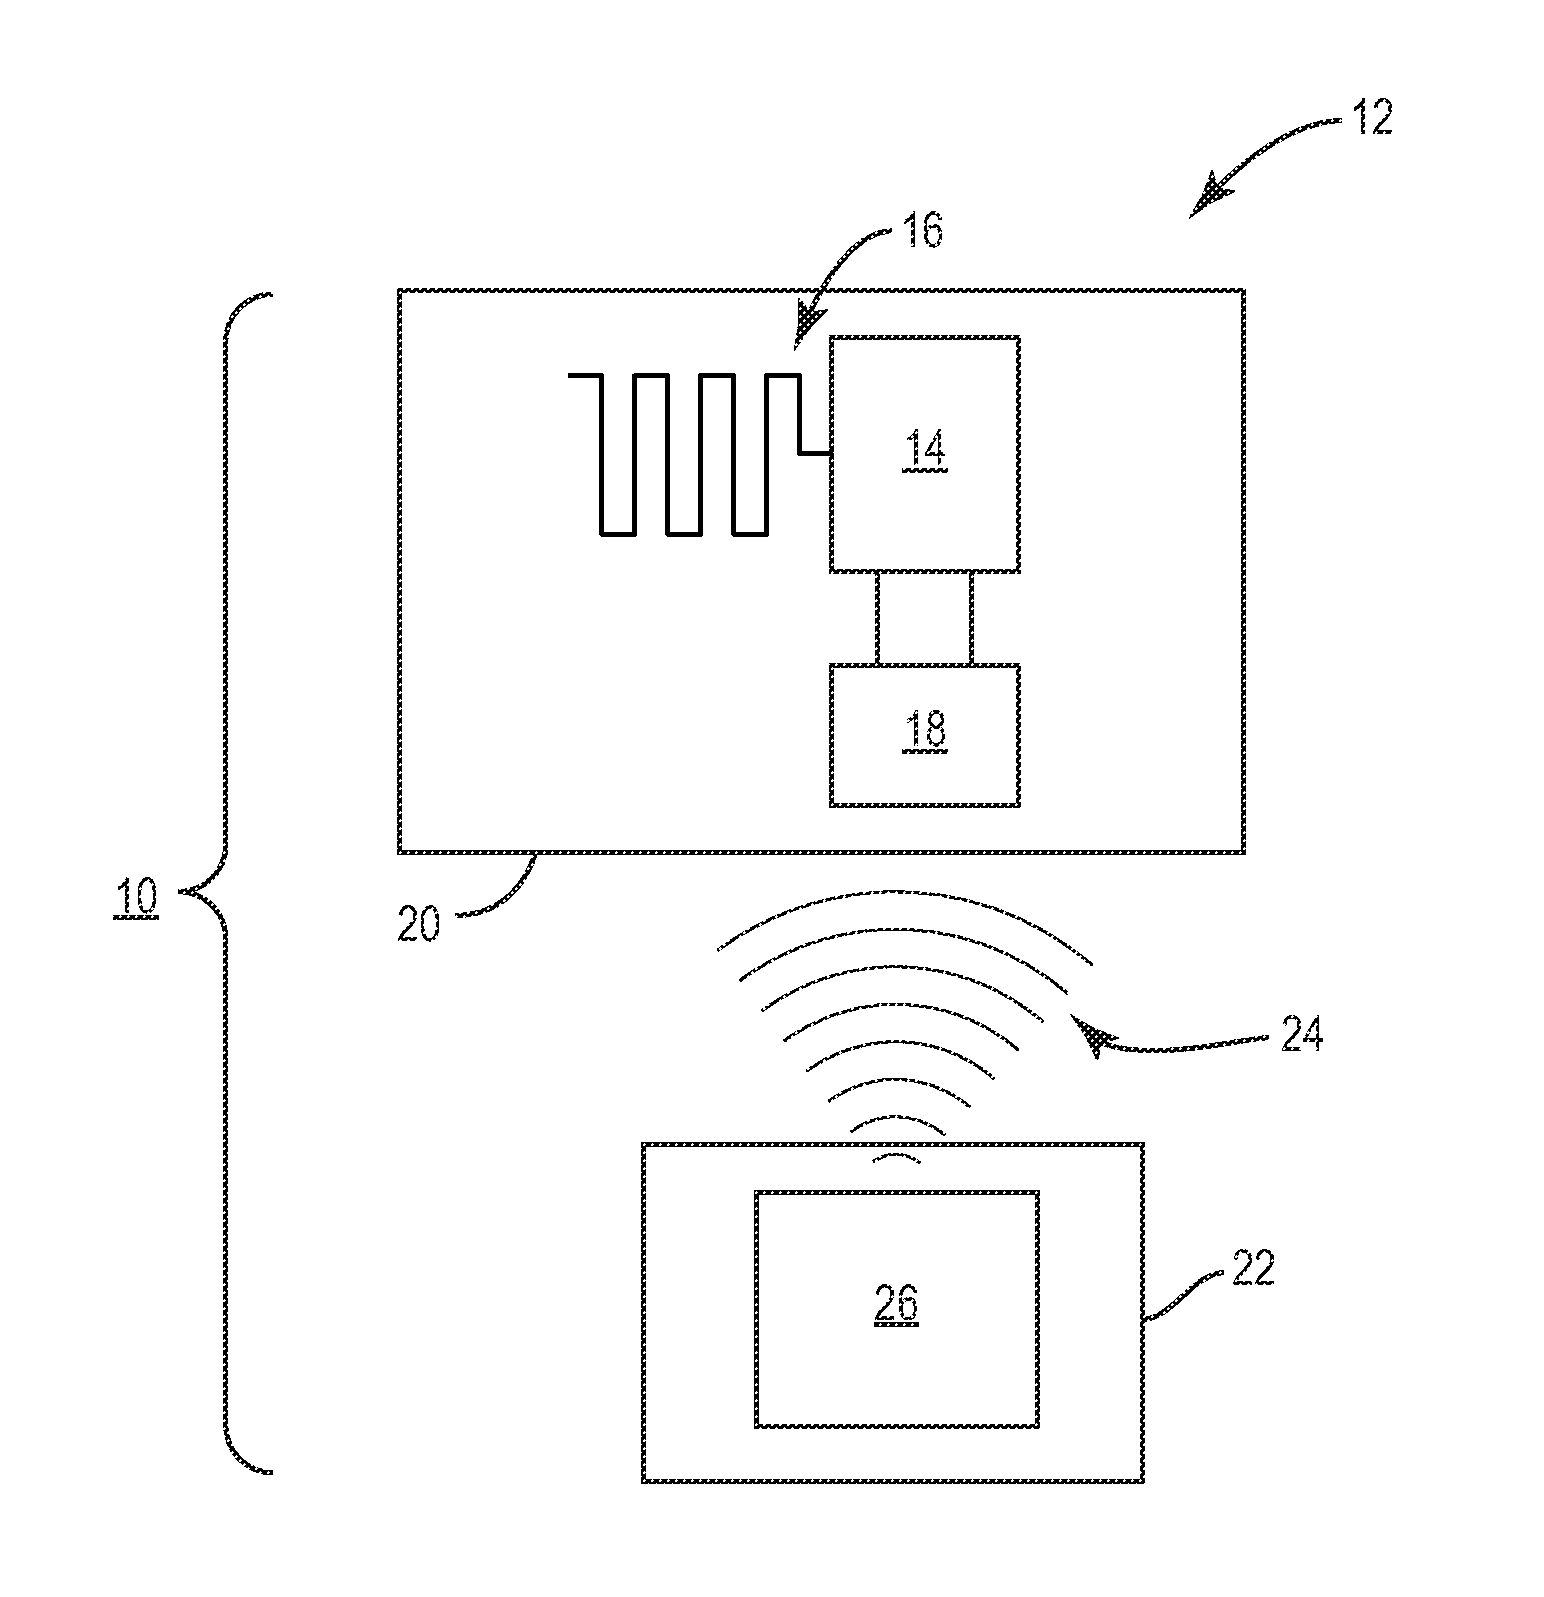 Discontinuous loop antennas suitable for radio-frequency identification (RFID) tags, and related components, systems, and methods